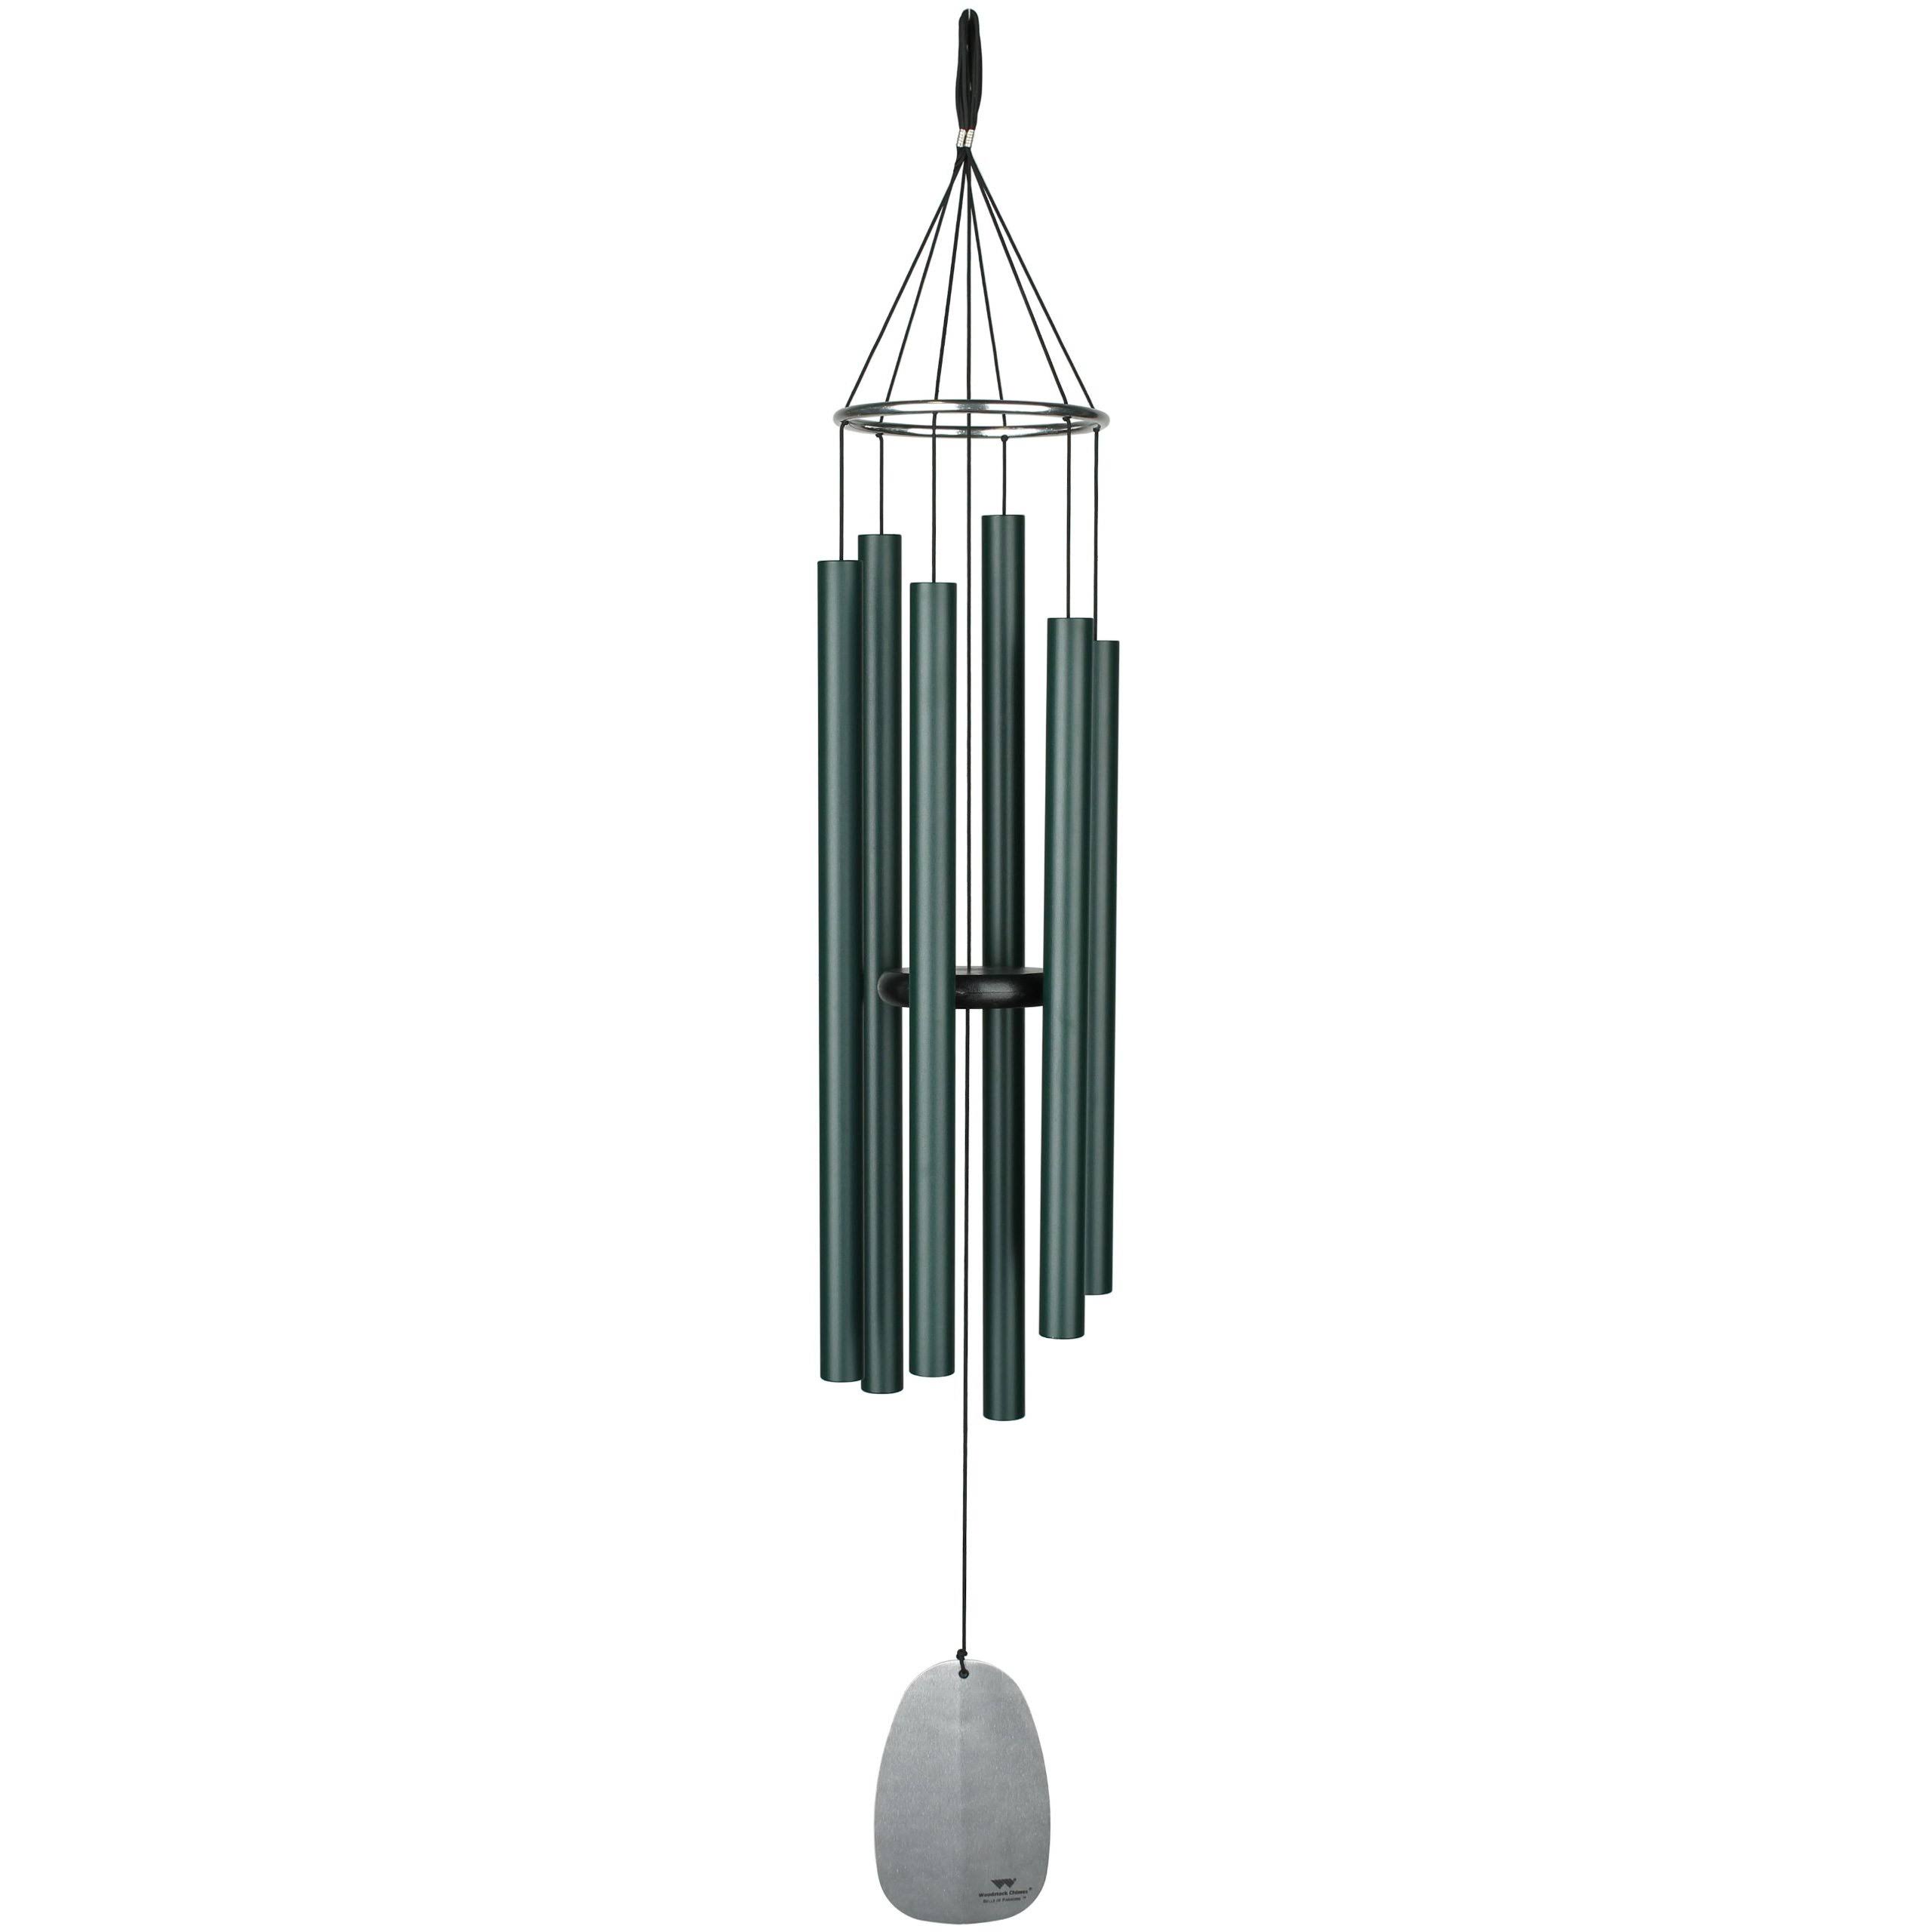 Woodstock Chimes Signature Bells of Paradise Chime - Rainforest Green, Large